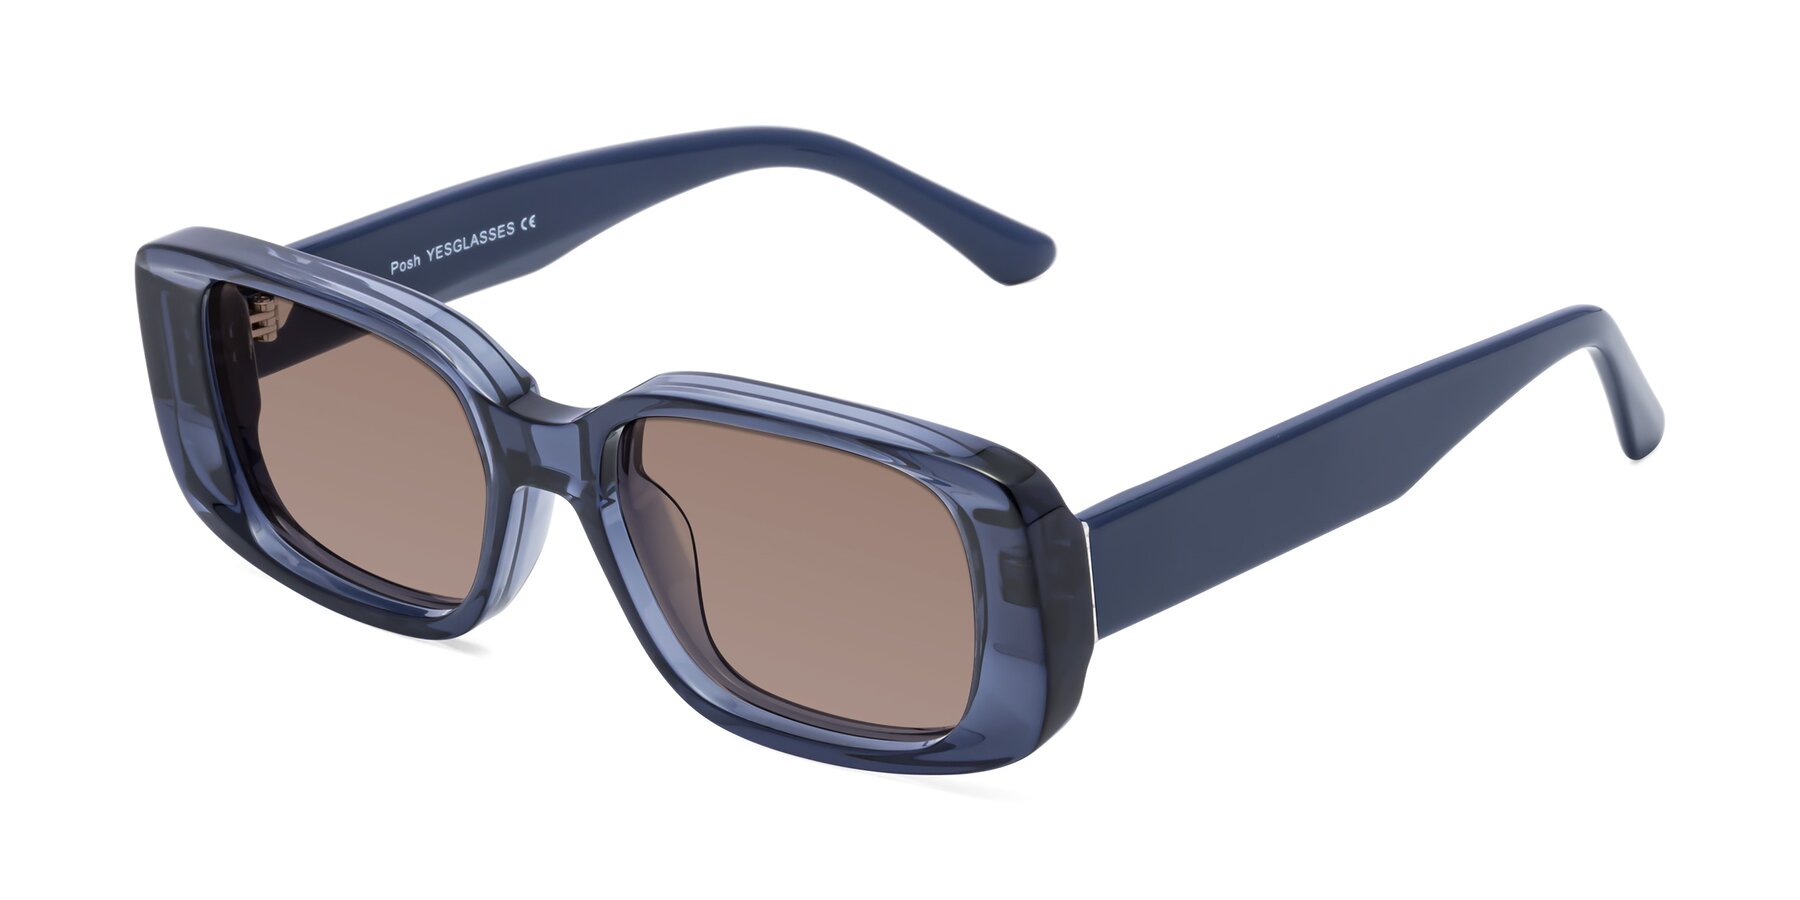 Angle of Posh in Translucent Blue with Medium Brown Tinted Lenses